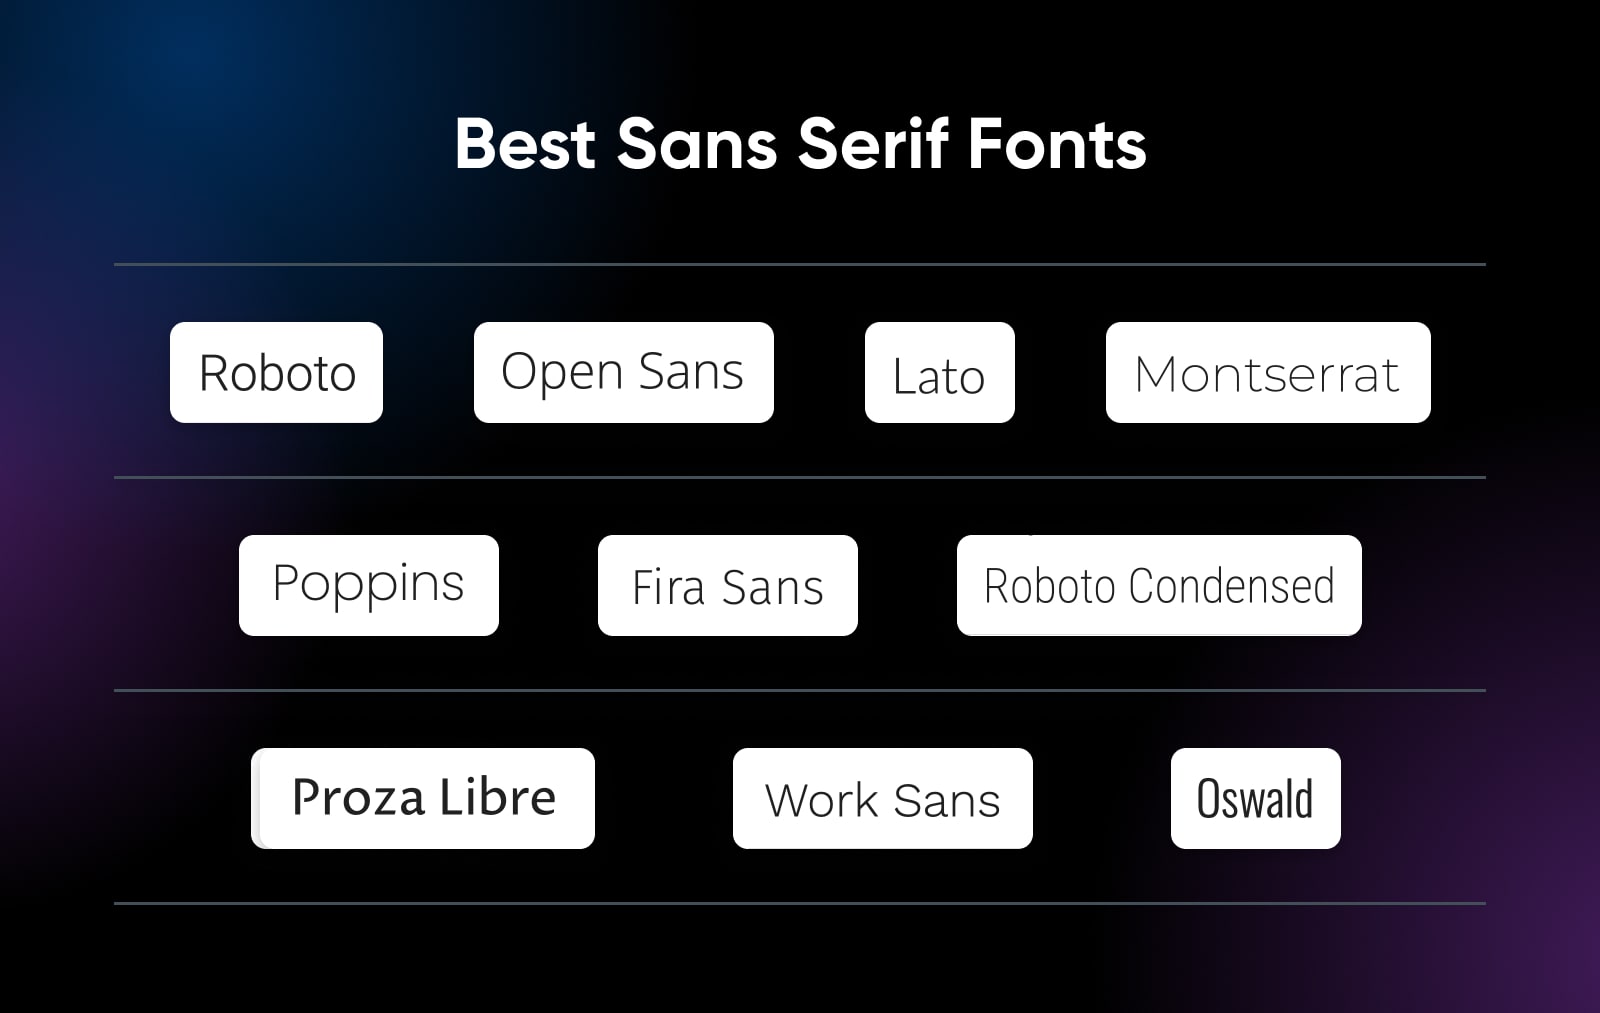 Best sans serif fonts showing an example of each of the ten fonts listed below